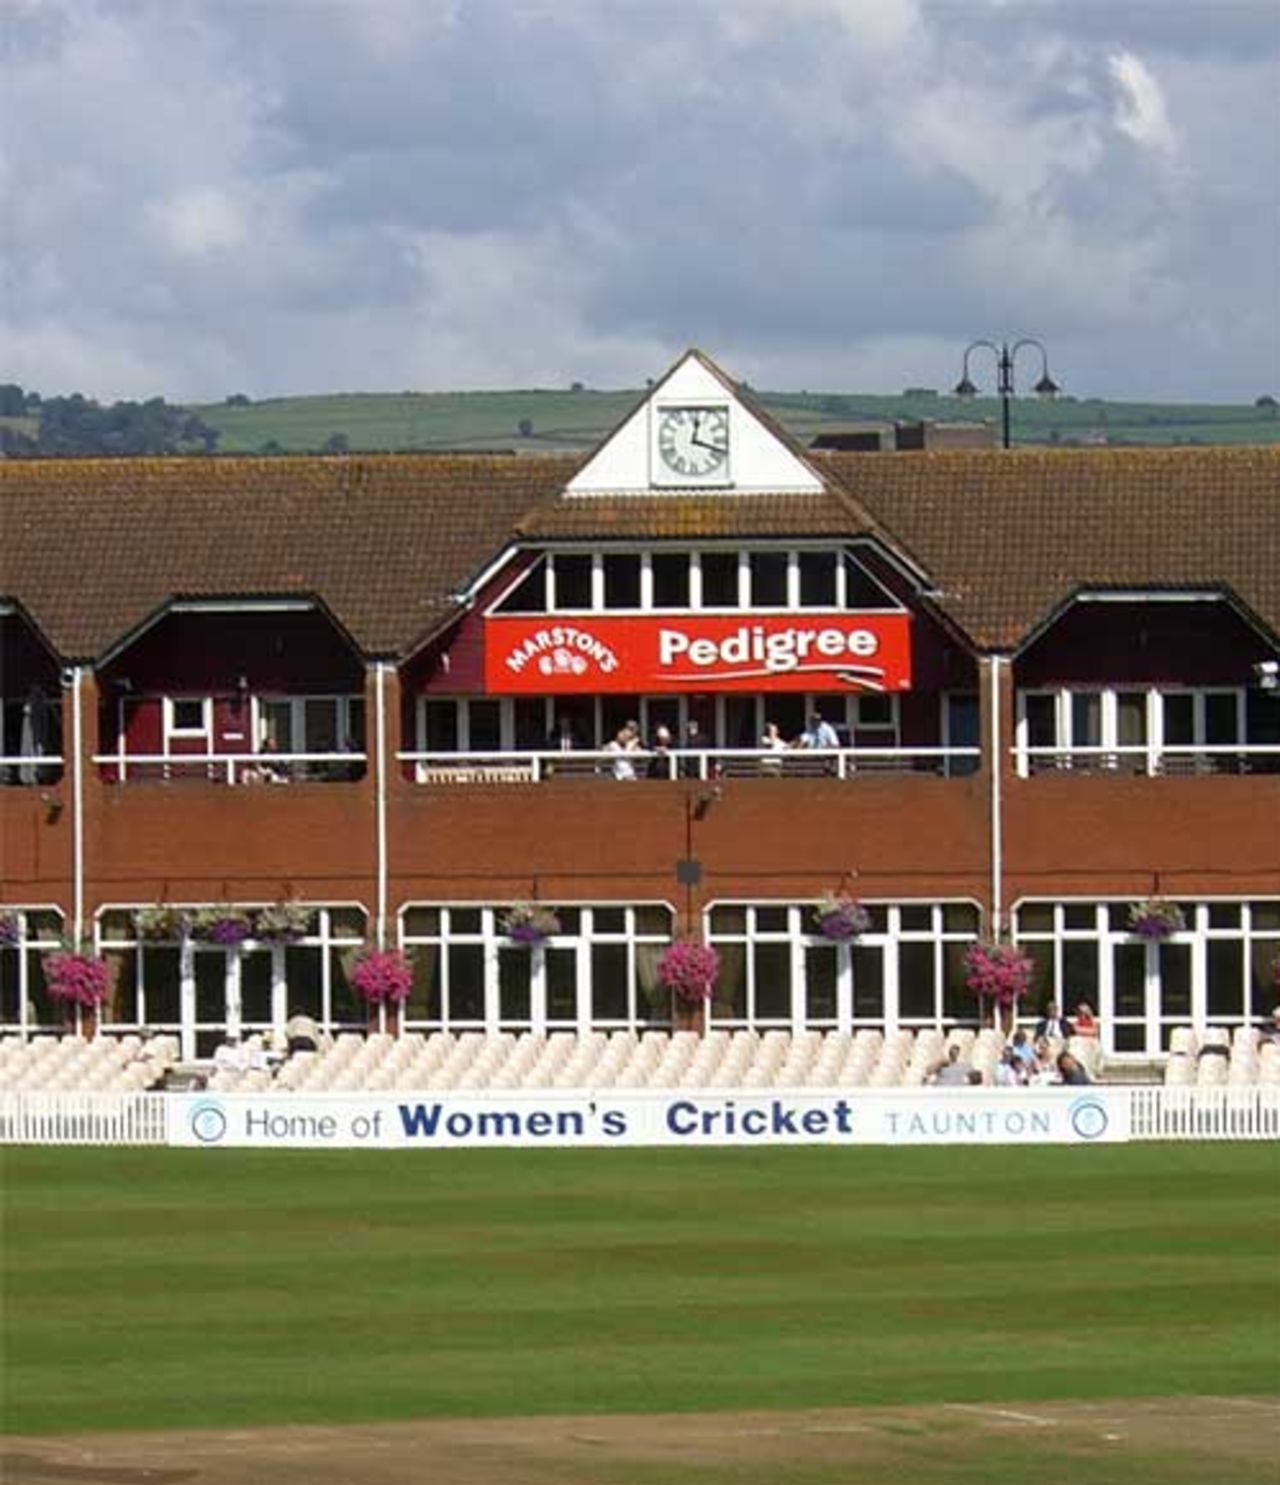 Taunton have made a real effort to be the home of women's cricket, as the boundary board here shows, England women v India women, second Test, Taunton, 29 August, 2006